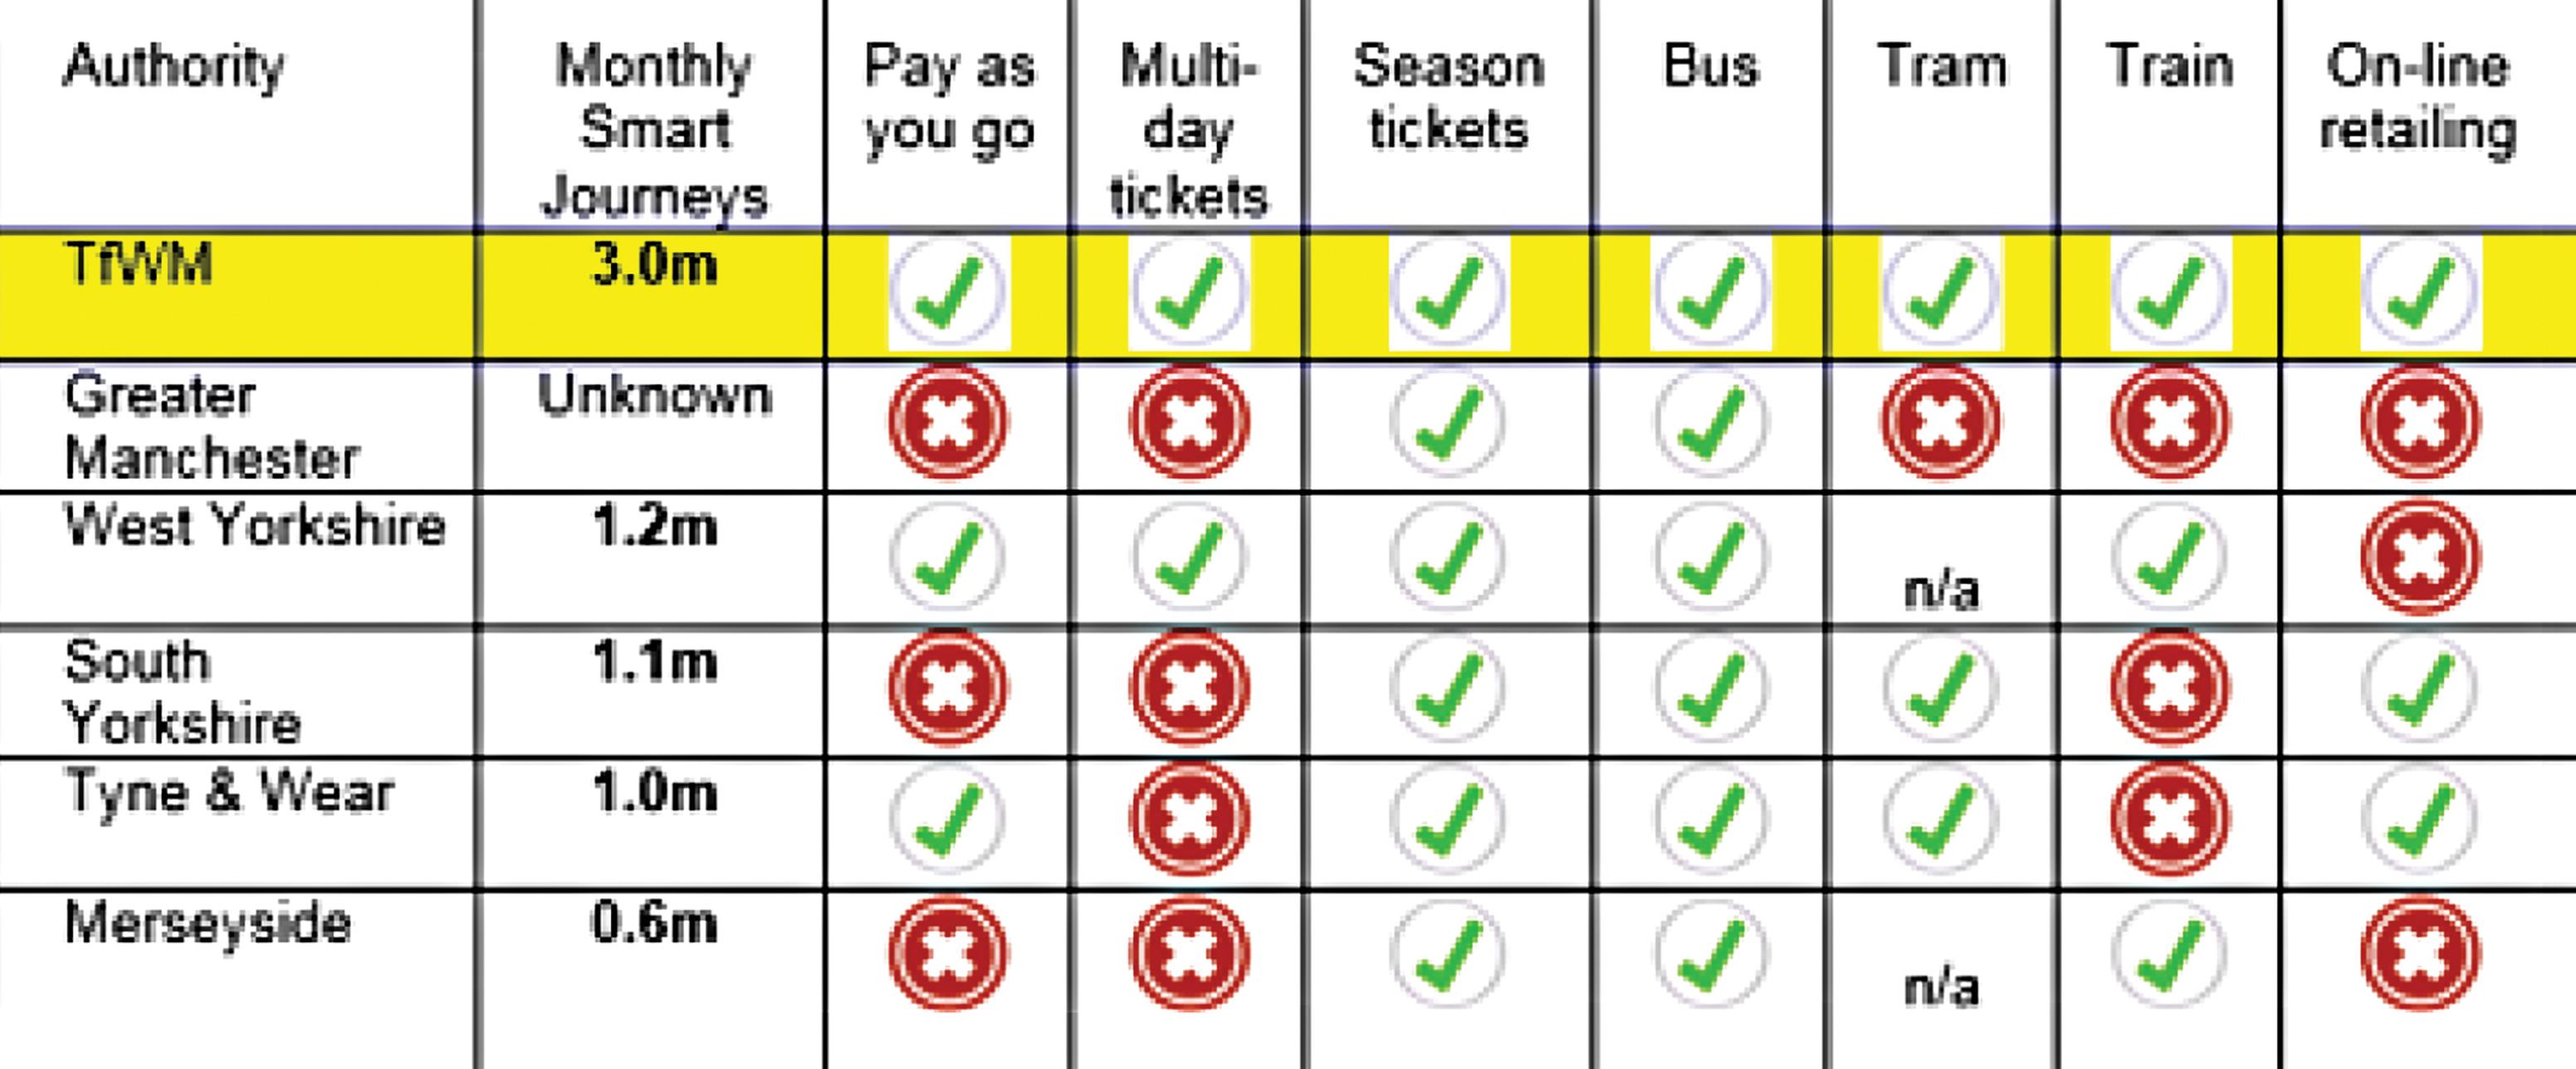 Smart ticketing in the conurbations
Source: TfWM, Urban Transport Group